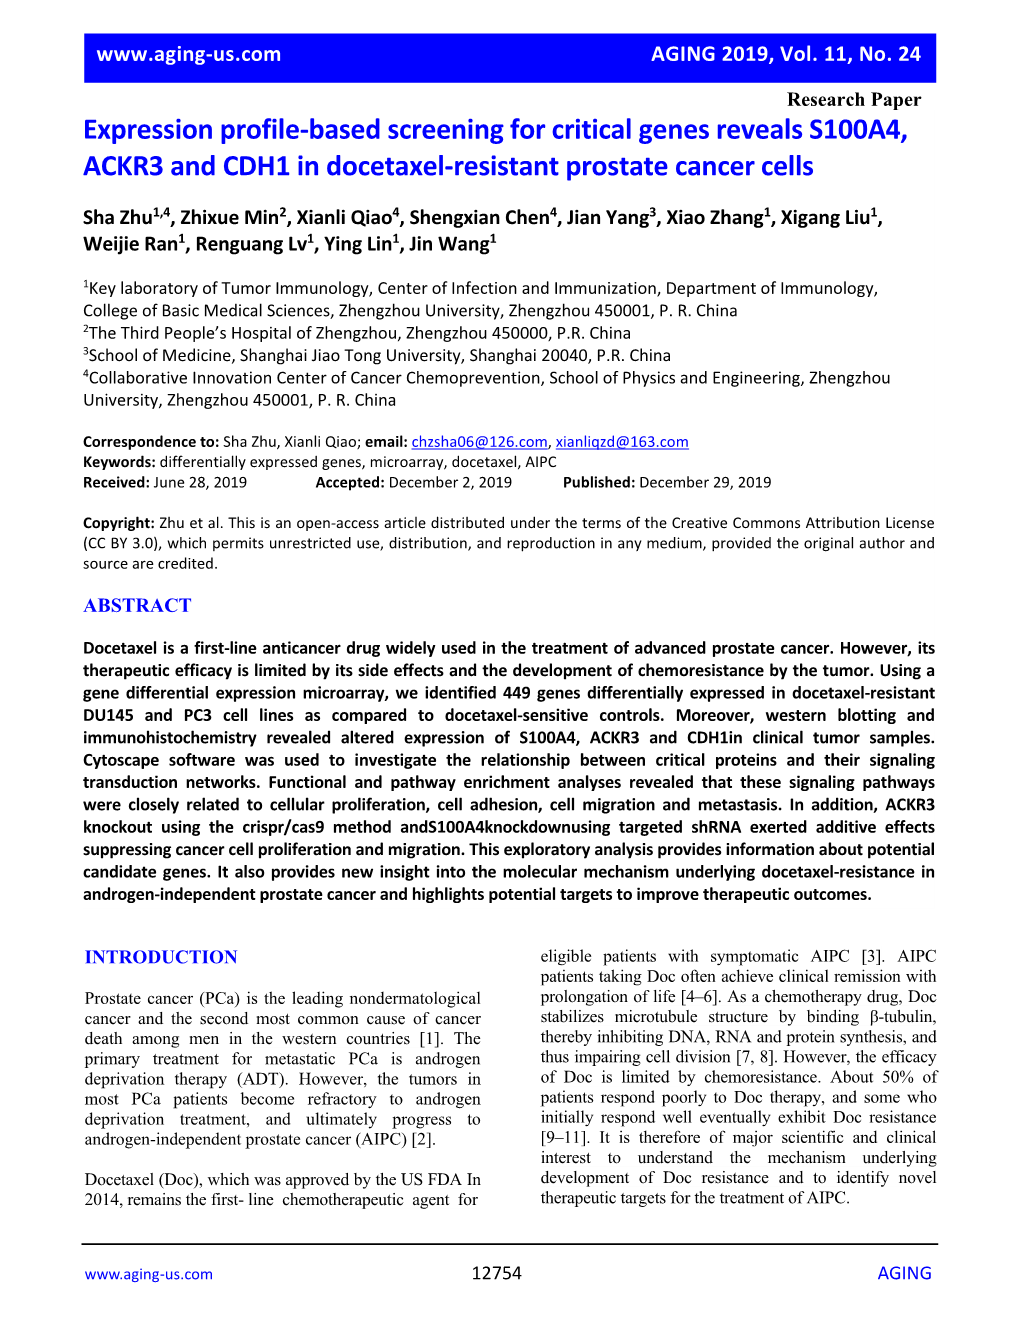 Expression Profile-Based Screening for Critical Genes Reveals S100A4, ACKR3 and CDH1 in Docetaxel-Resistant Prostate Cancer Cells